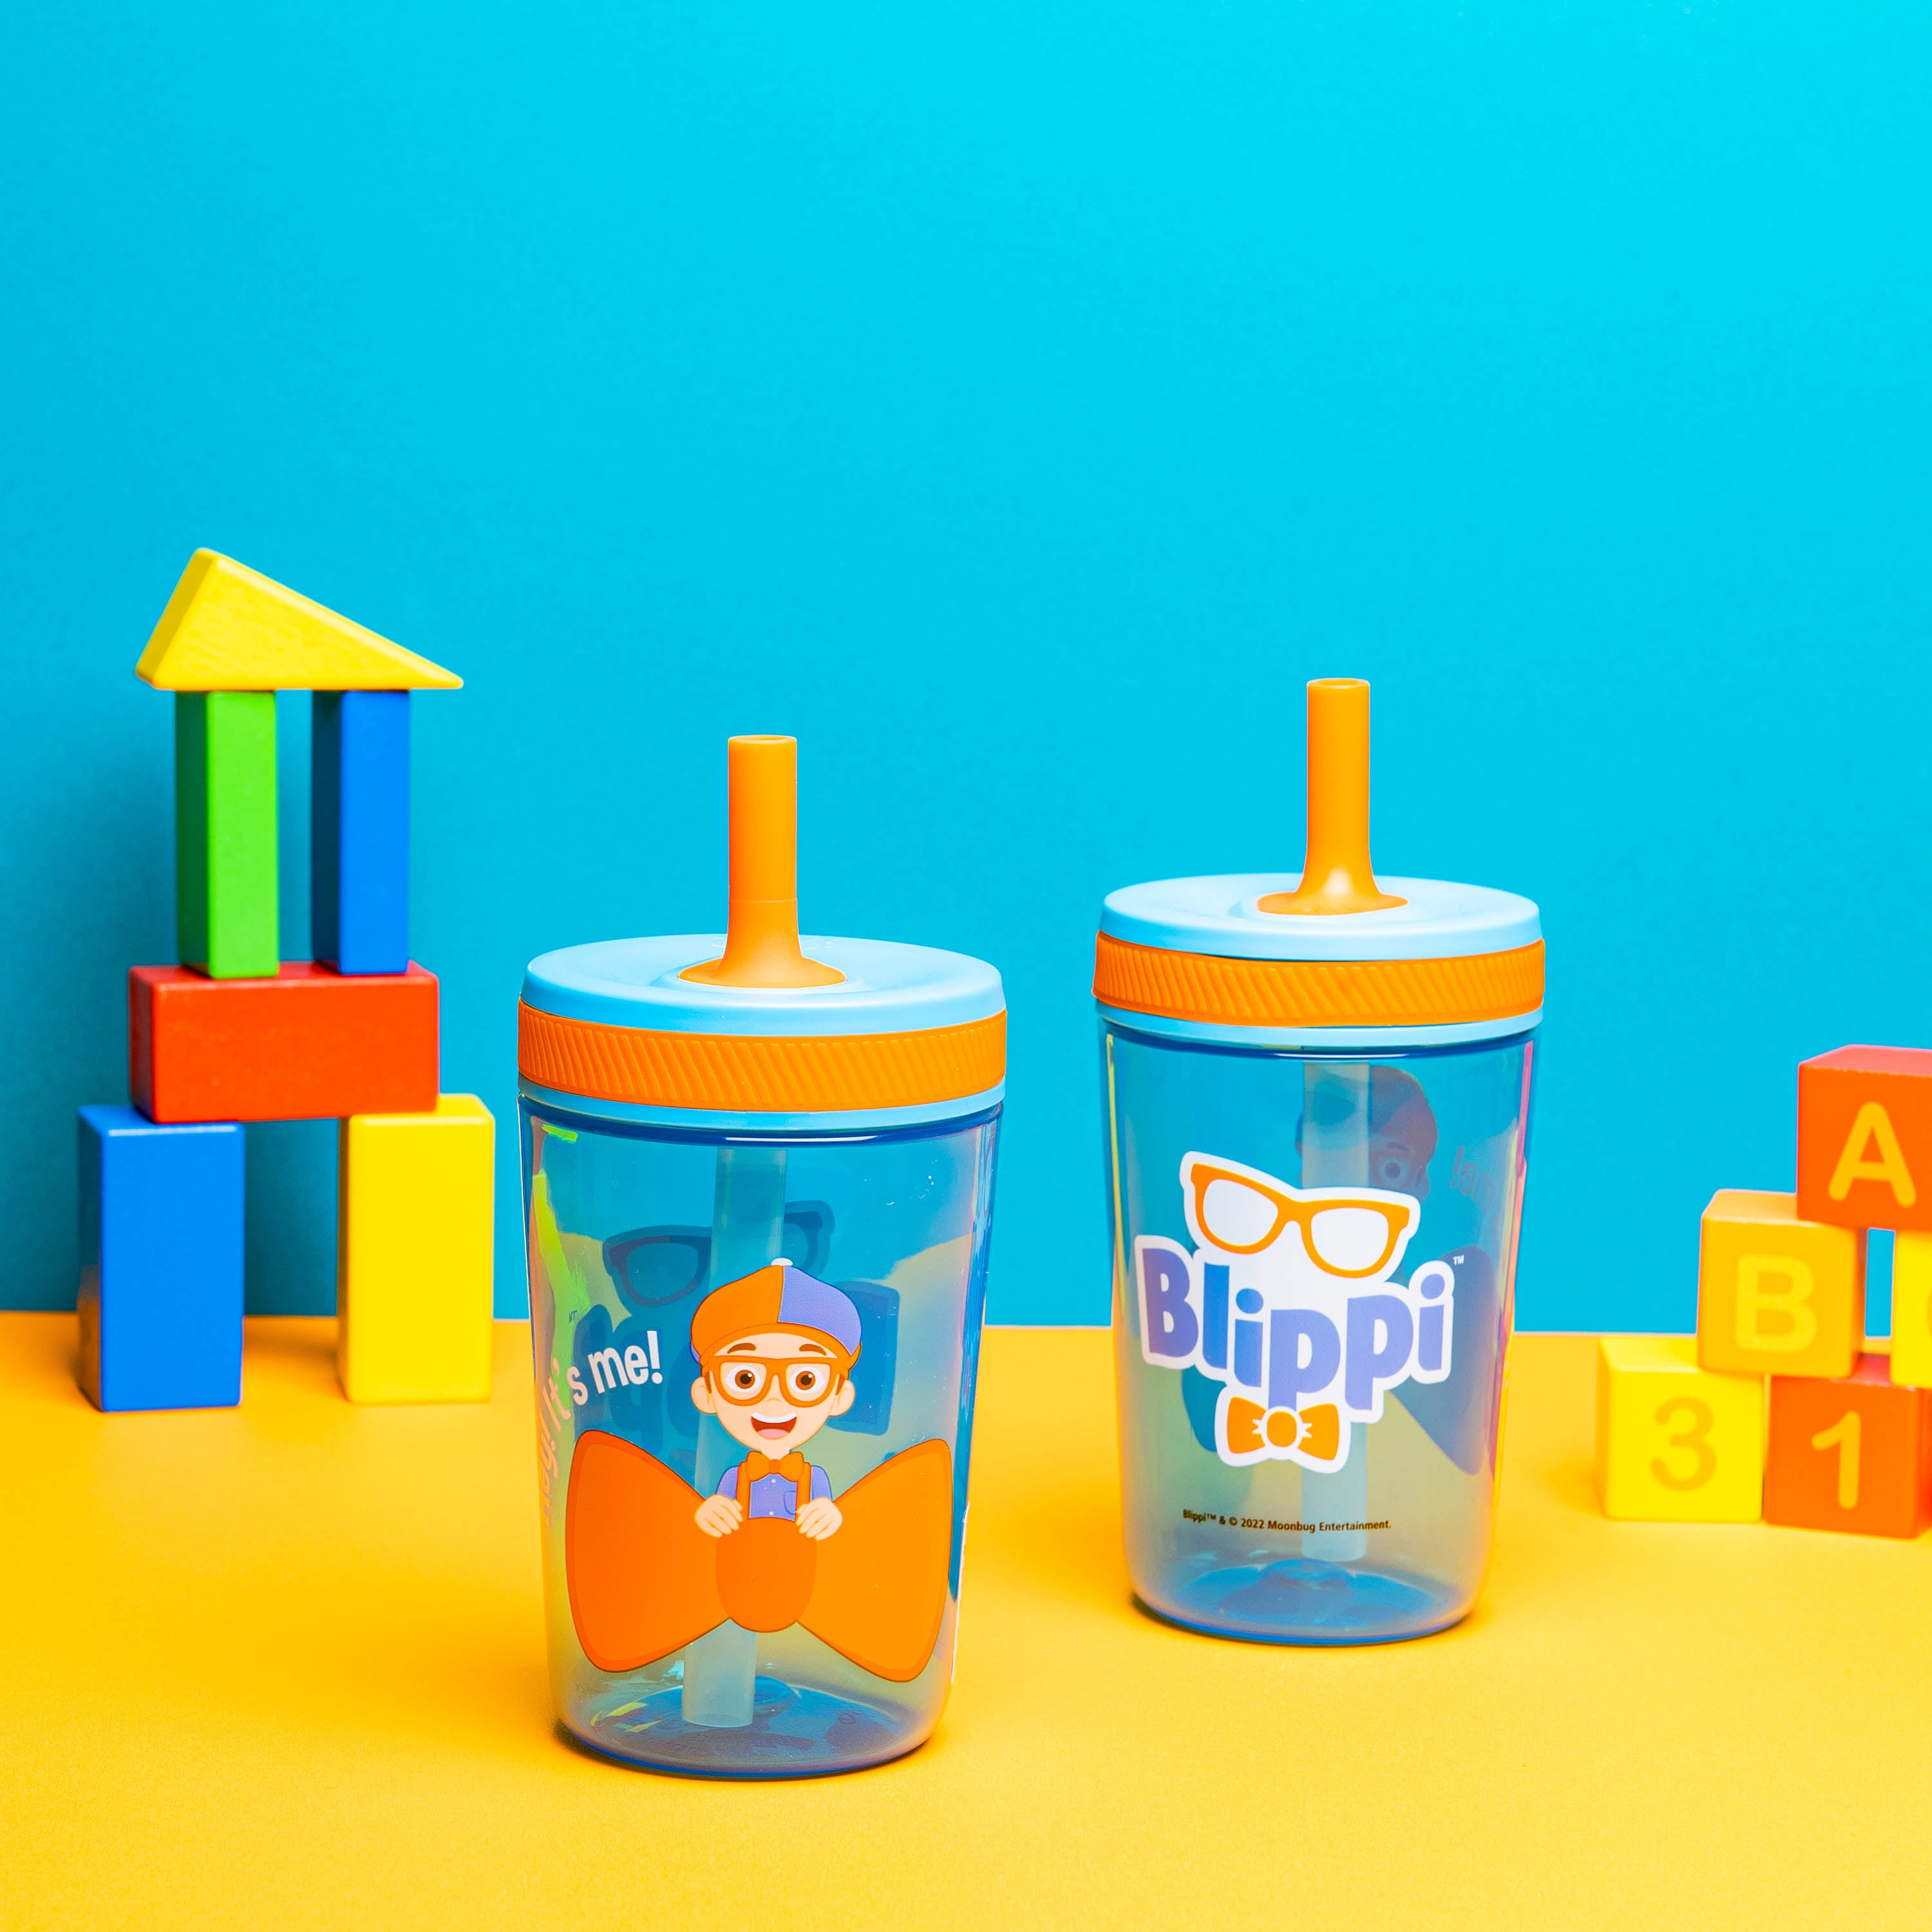 BABY SHARK! MOMMY & ME Skinny Tumbler & Sippy Cup COMBO – Digital